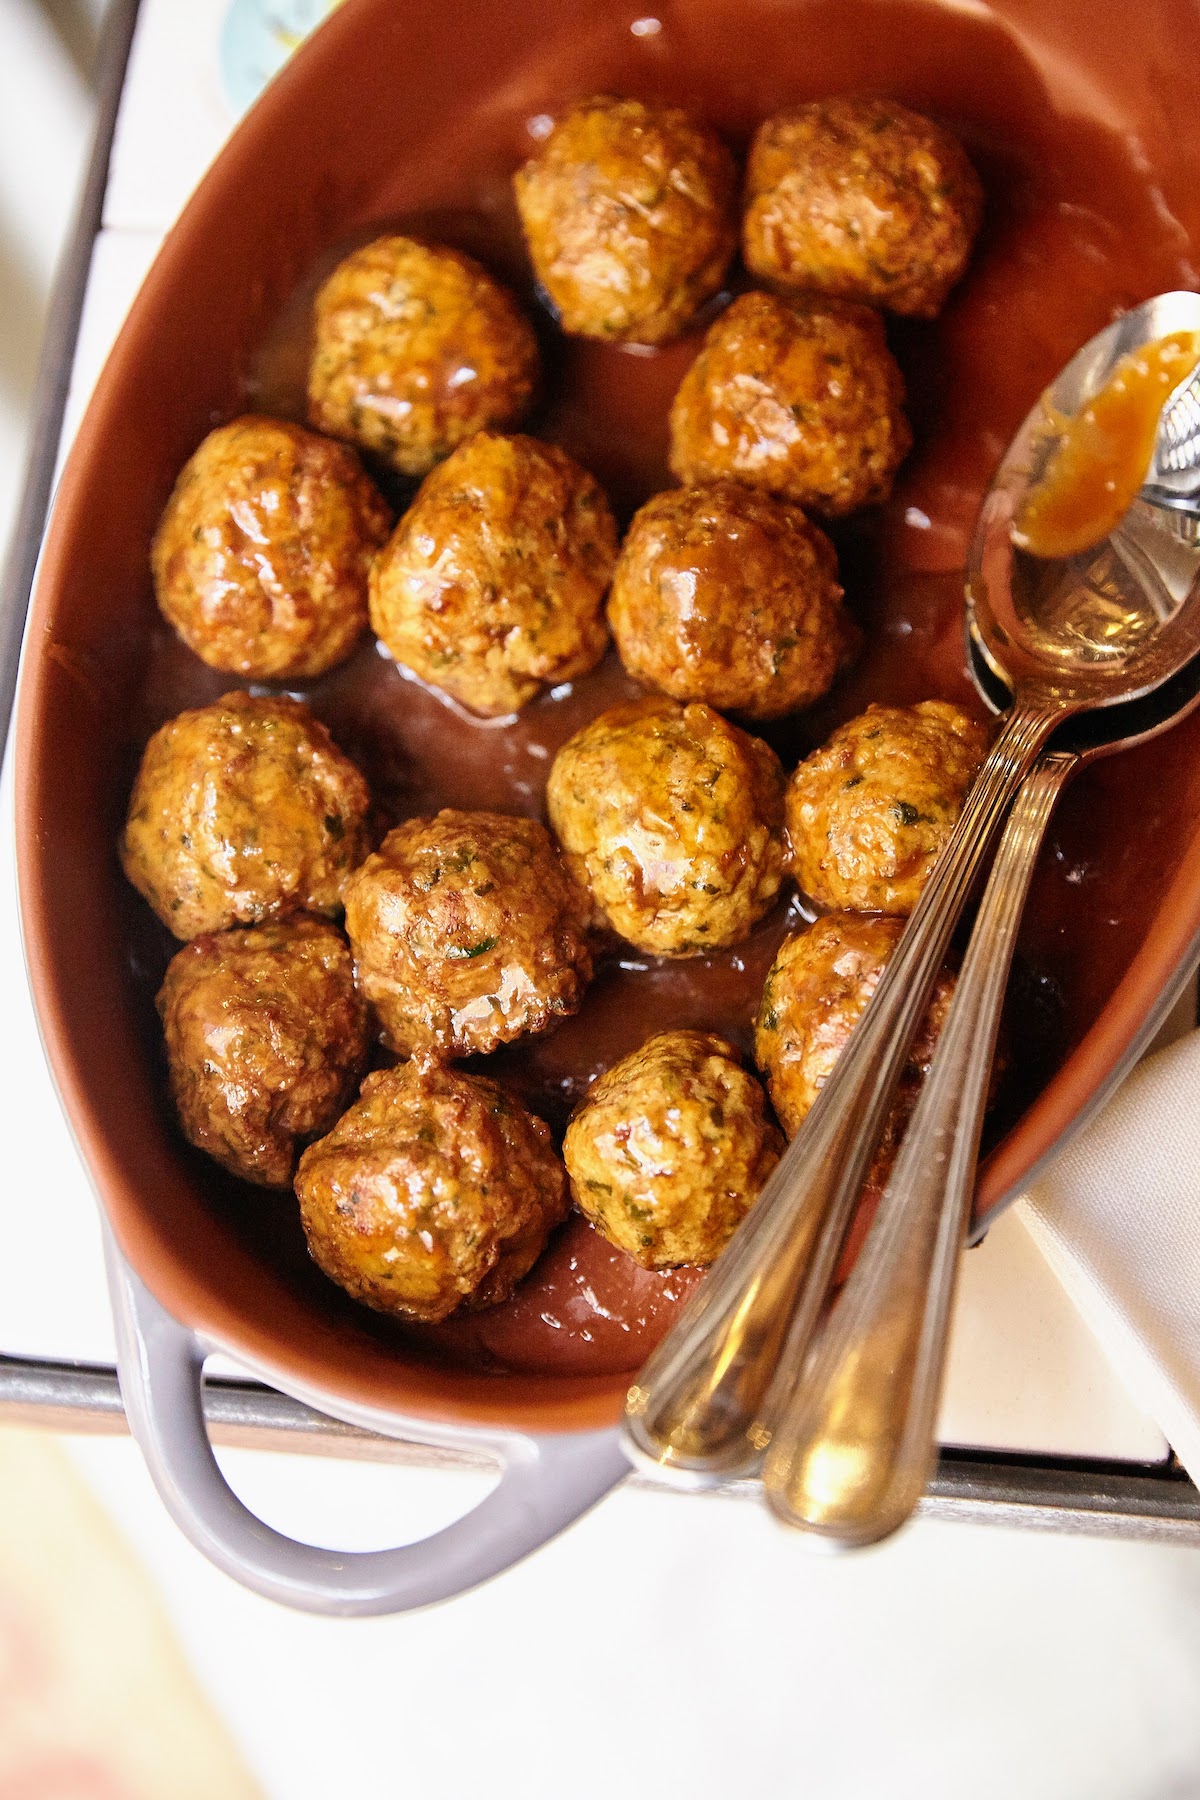 Overhead shot of meatballs and two metal spoons in a reddish-brown oval dish.